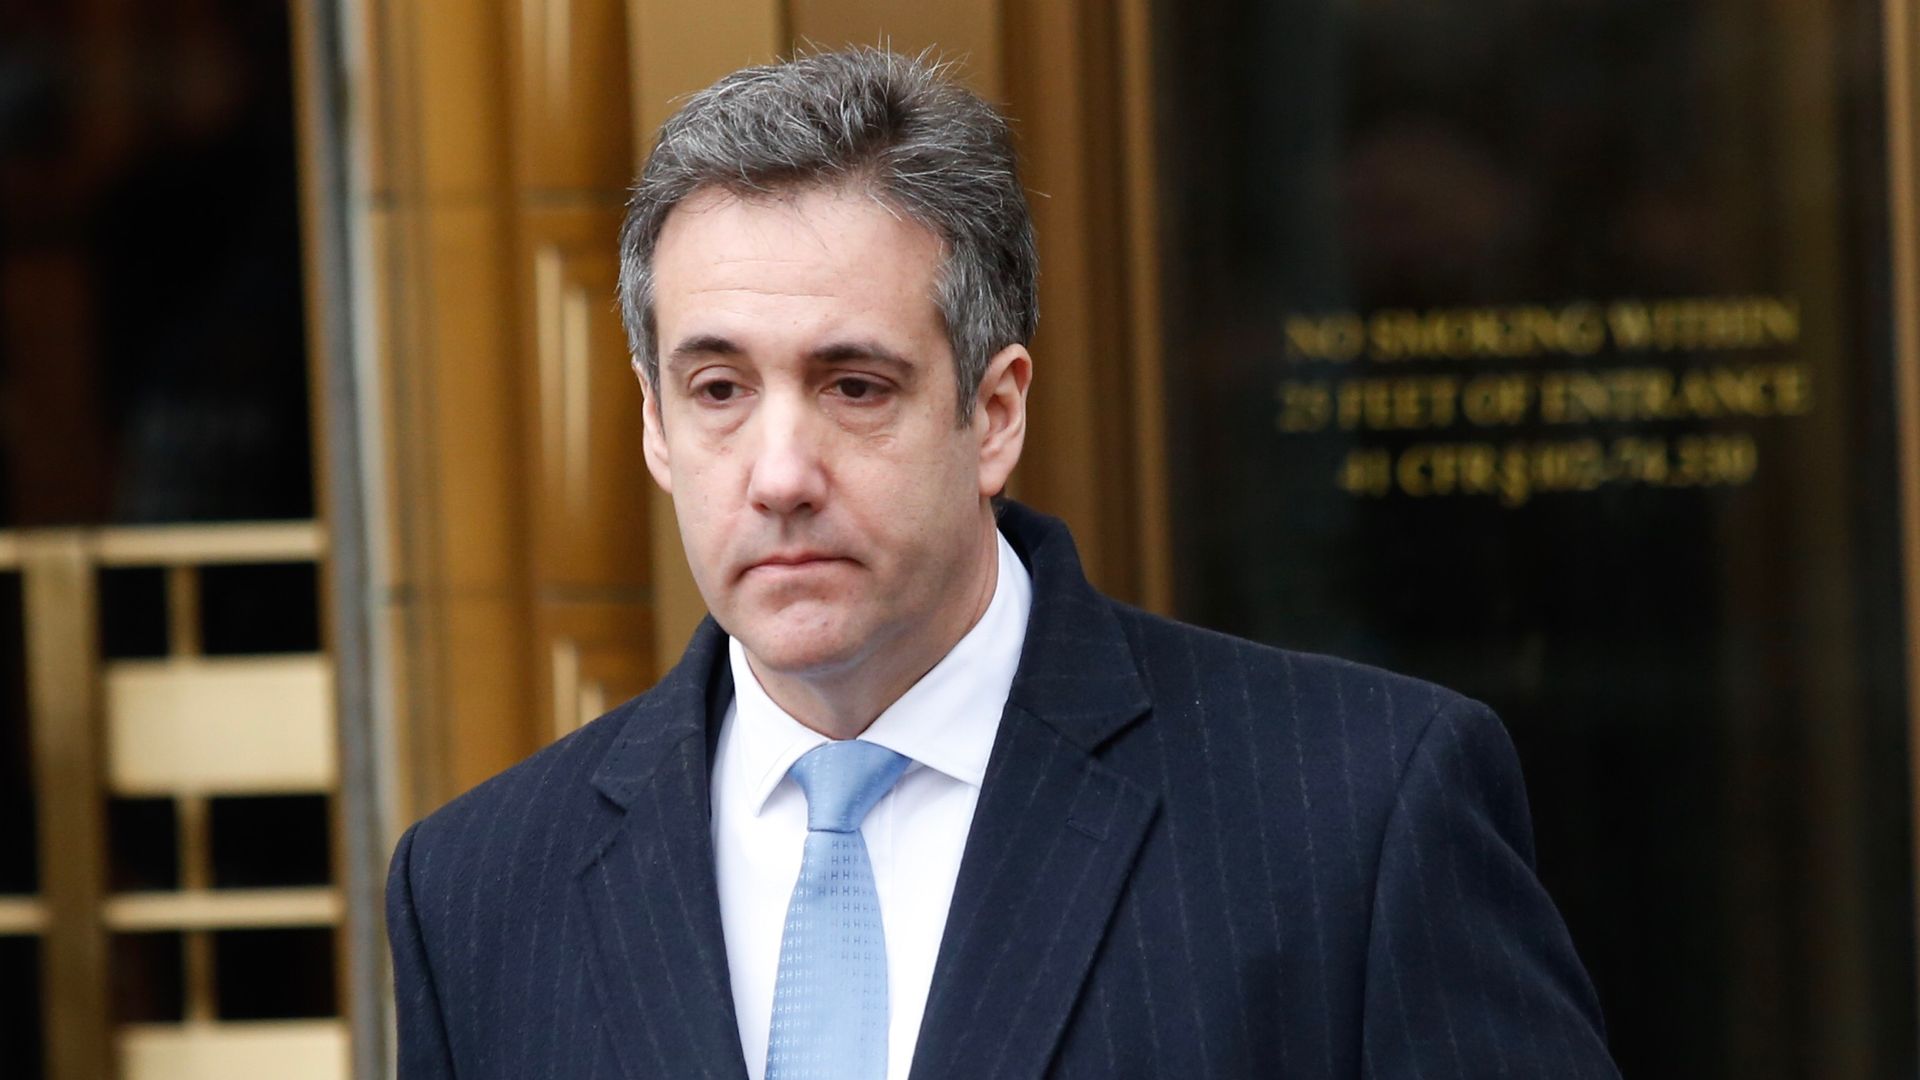 Michael Cohen will testify before the House Oversight Committee on Wednesday.